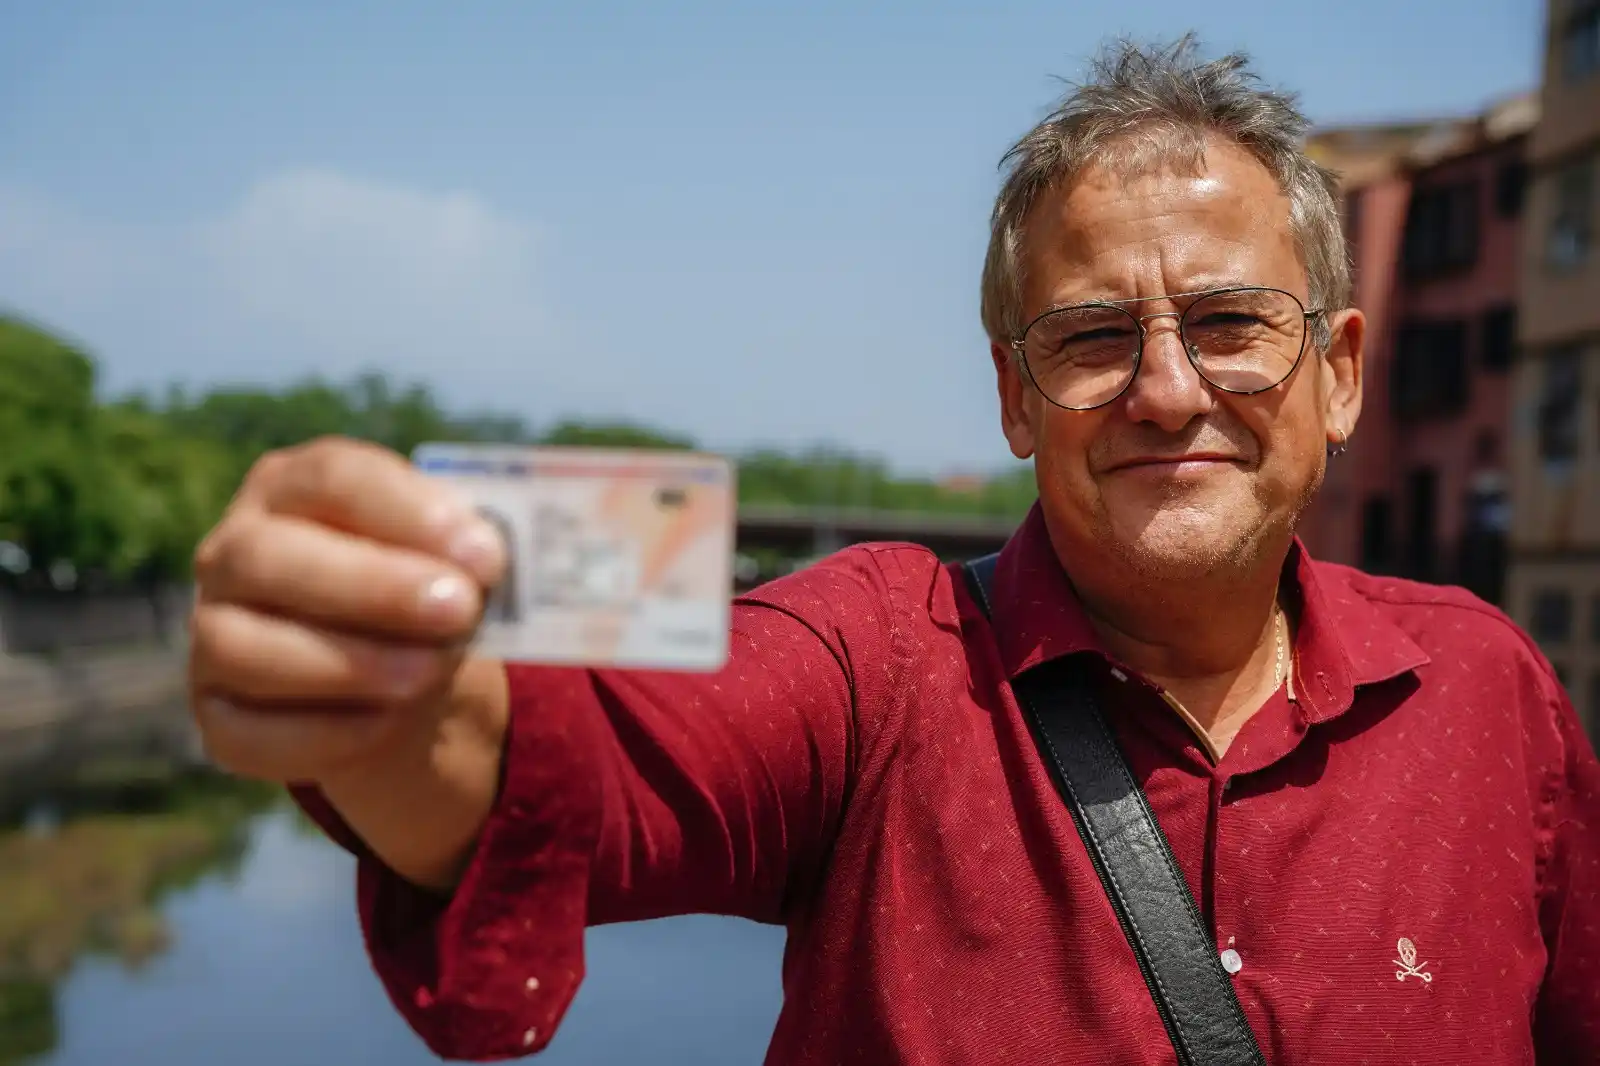 Man in his 60s wearing a red shirt and holding a TIE card (Spanish Foreigner Identity Card)